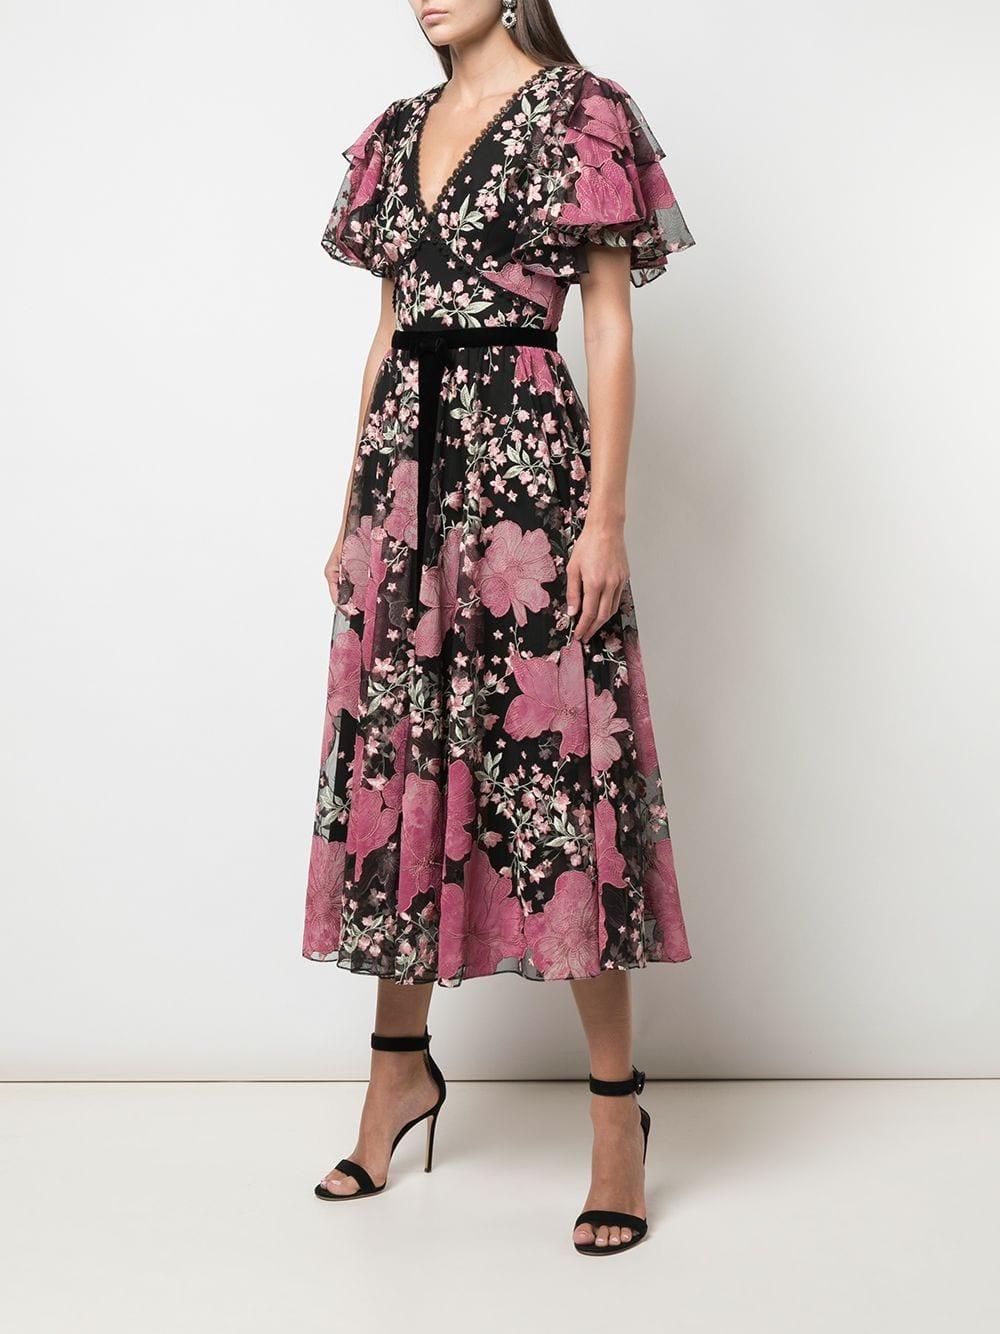 Marchesa notte Embroidered Floral Ruffled Dress in Black - Lyst